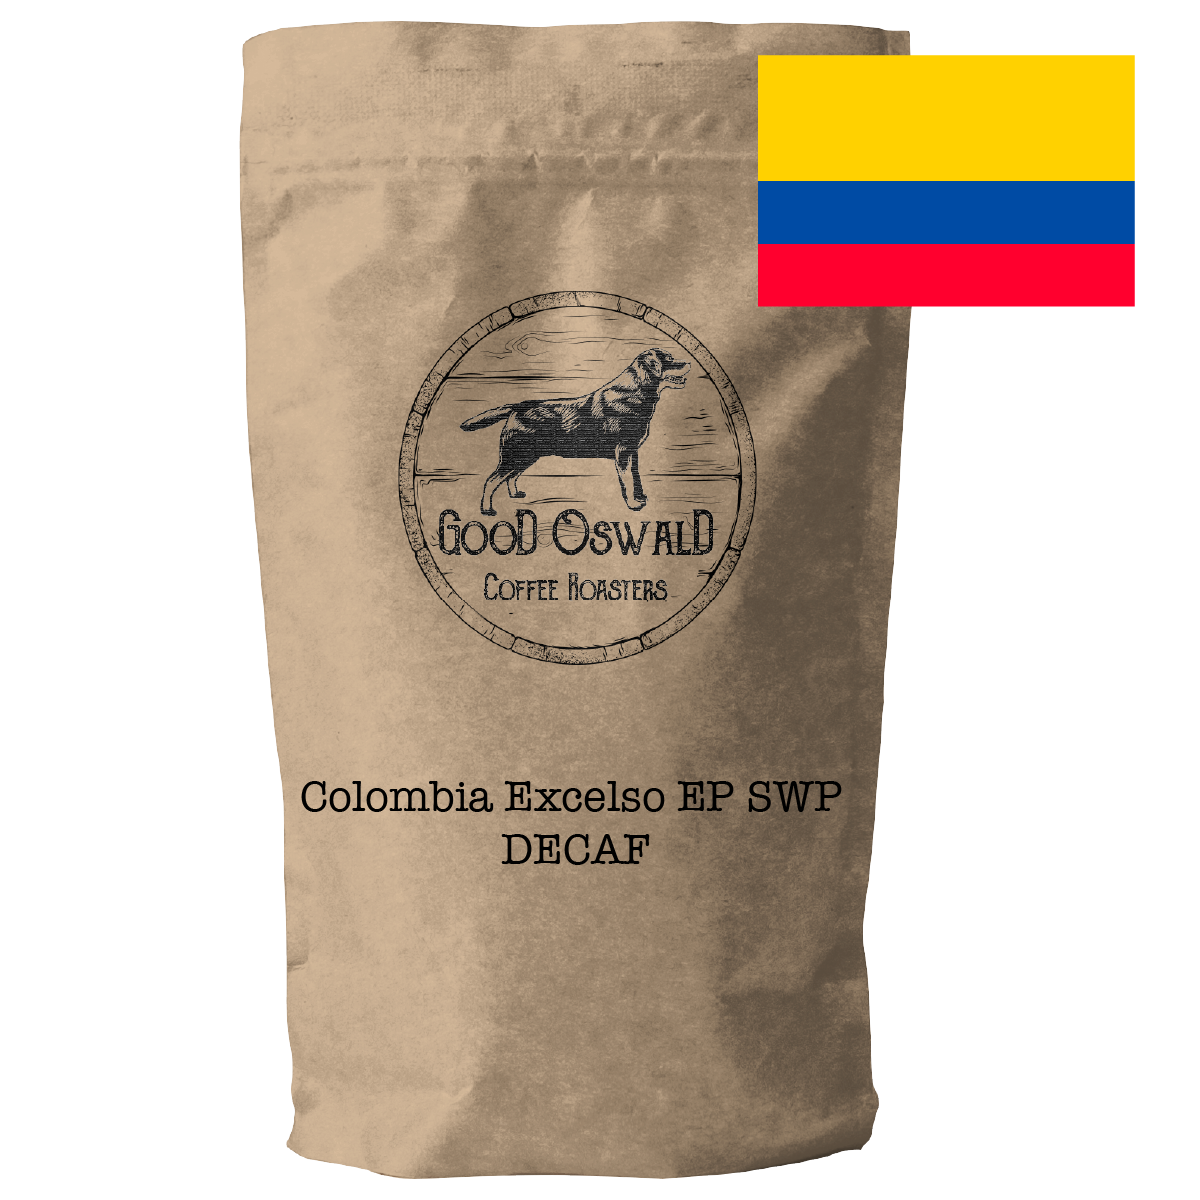 Colombie Excelso EP SWP DECAF